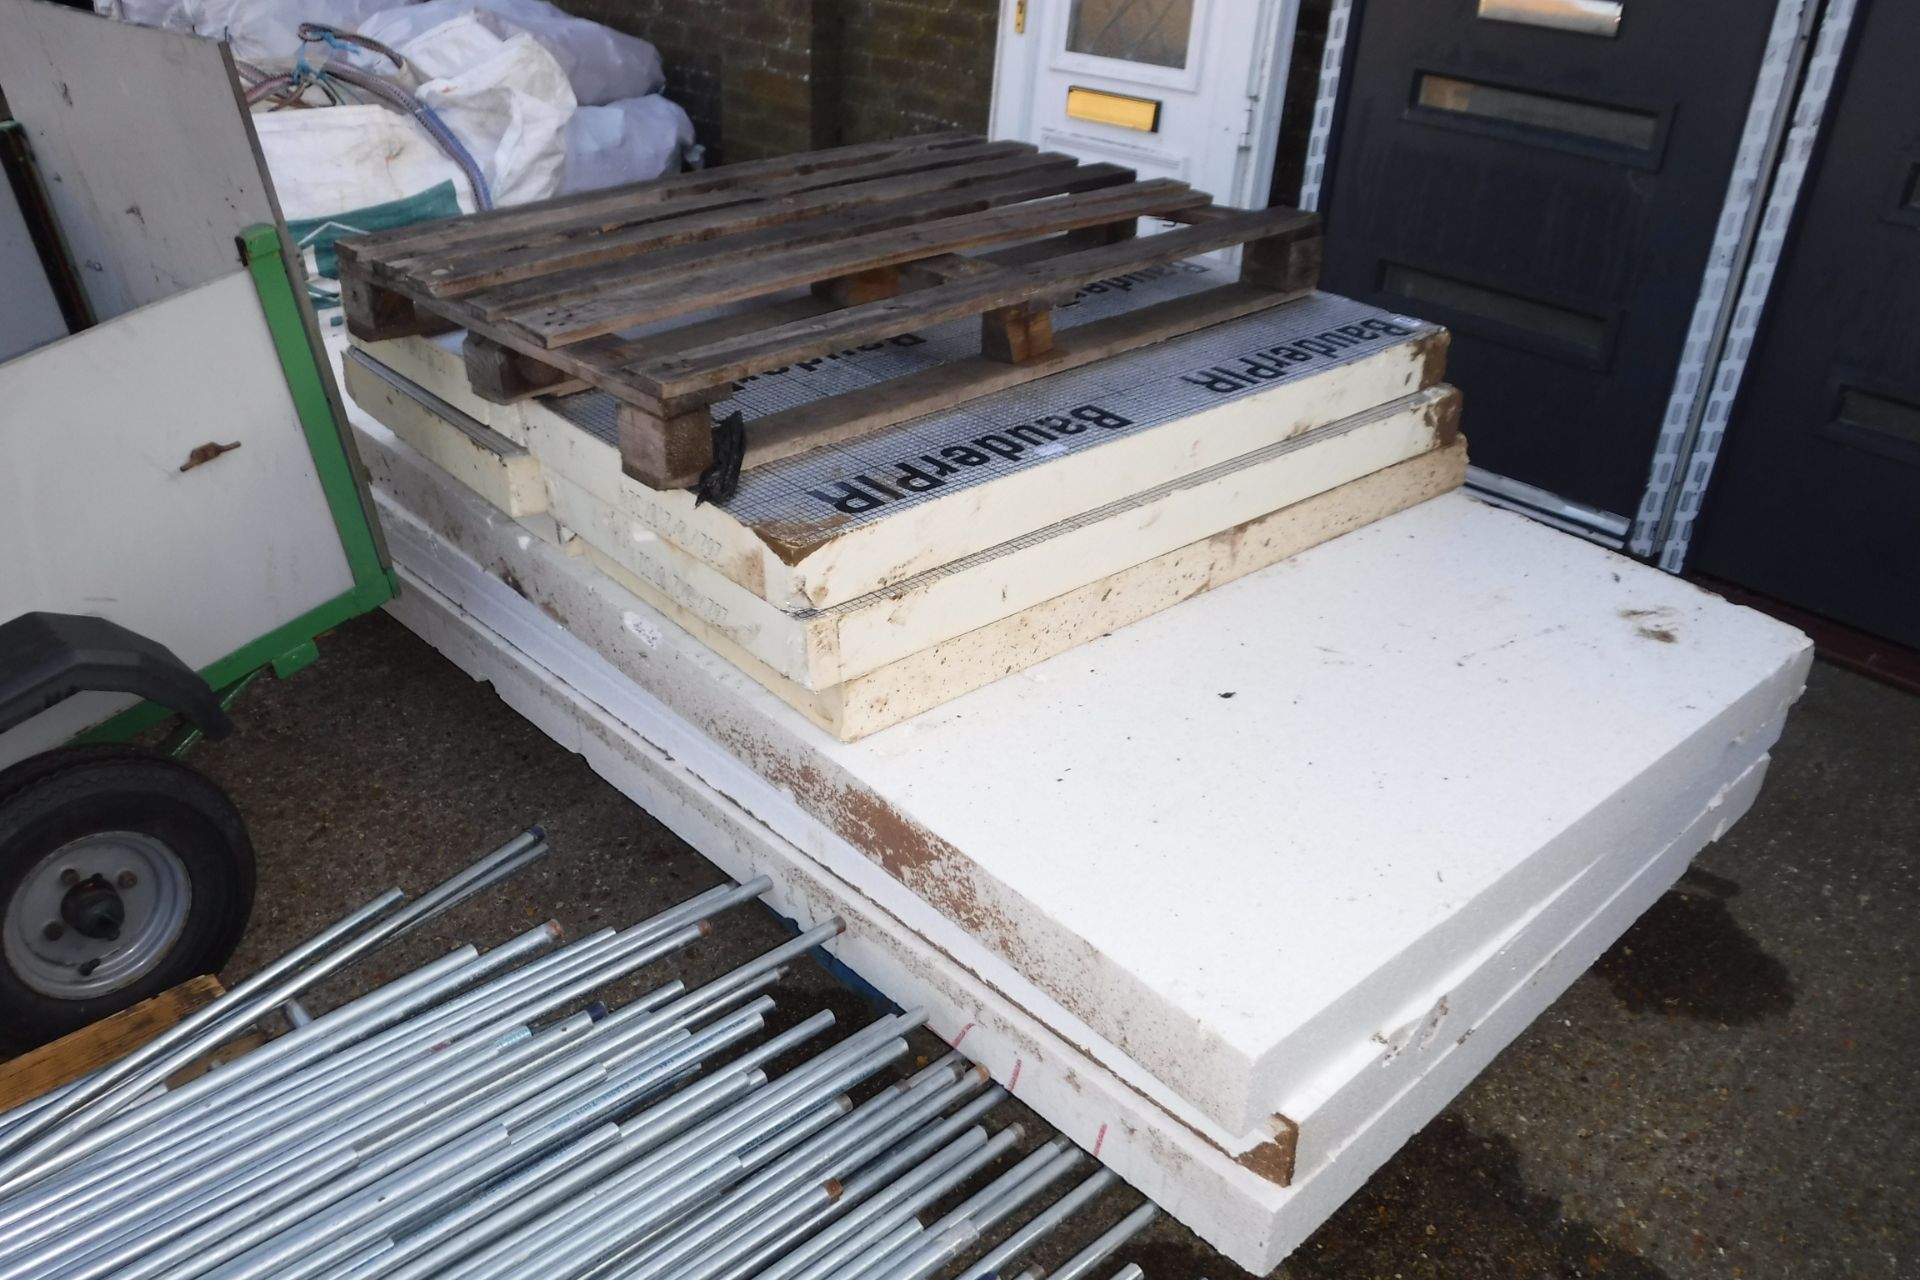 3 large sheets of polystyrene insulation with 6 small sheets of insulation board